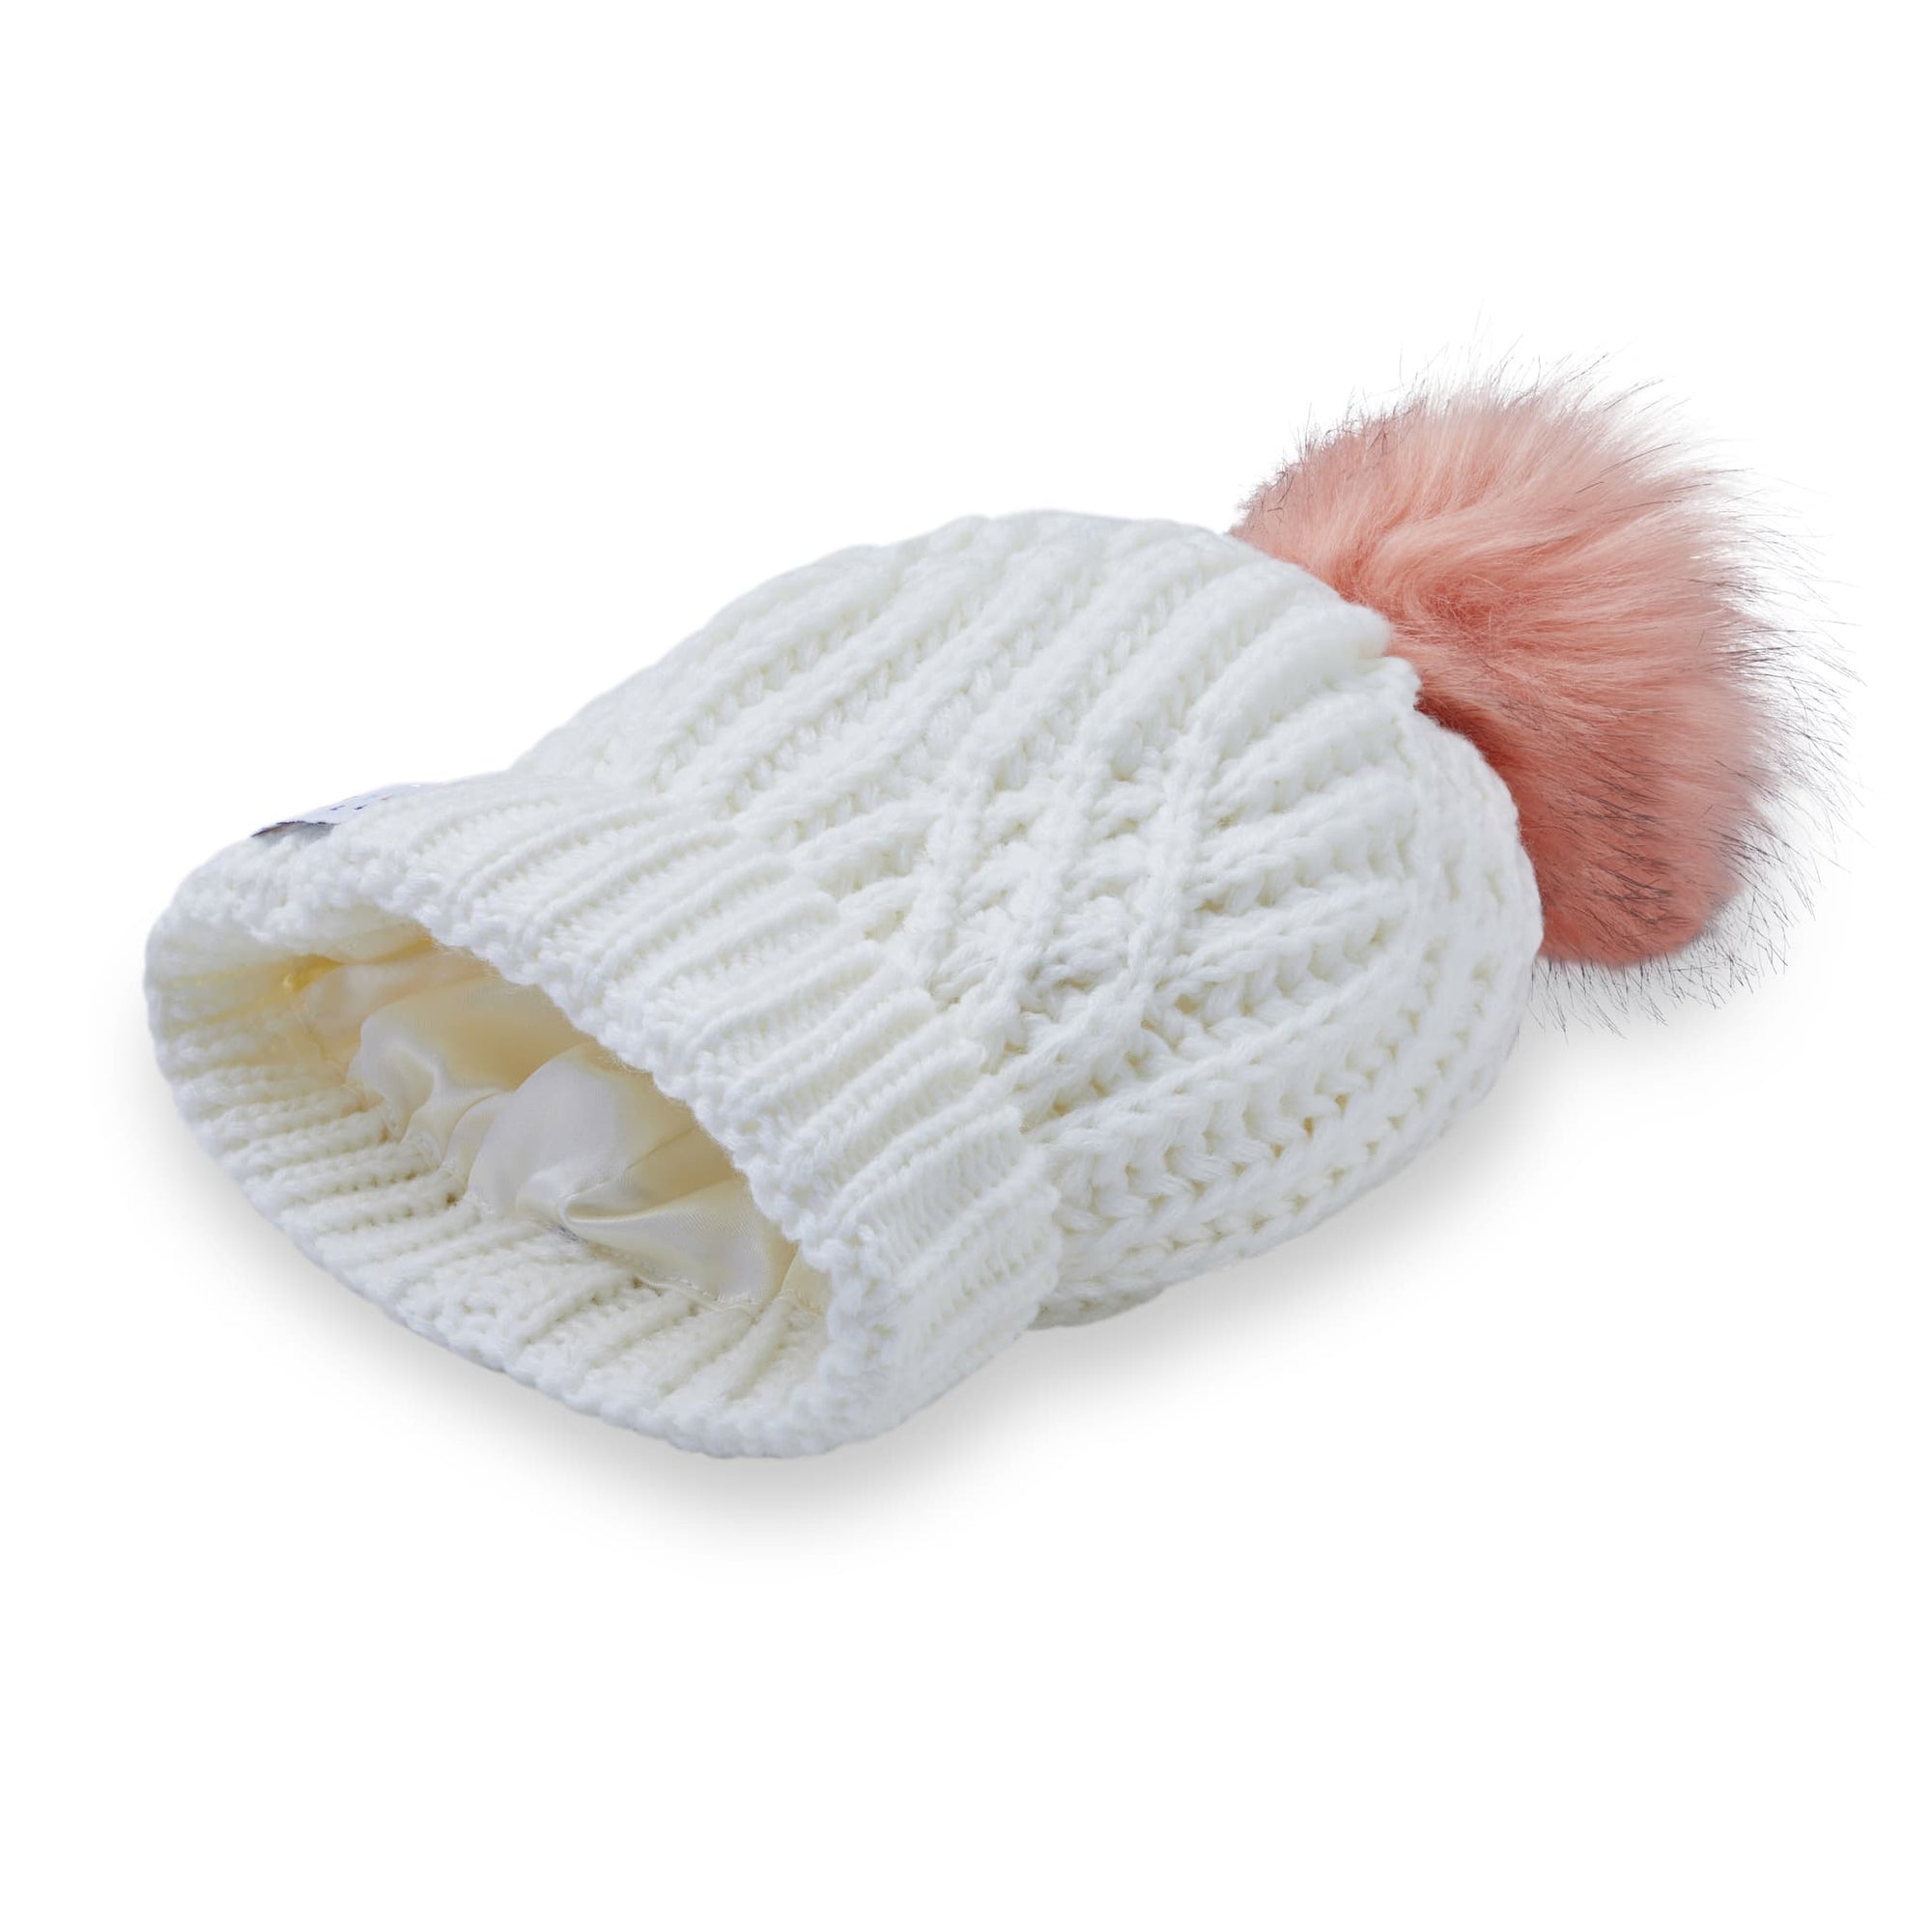 Little Curls Satin Lined Knitted Beanie Hat - Ivory with Pom Pom - Only Curls